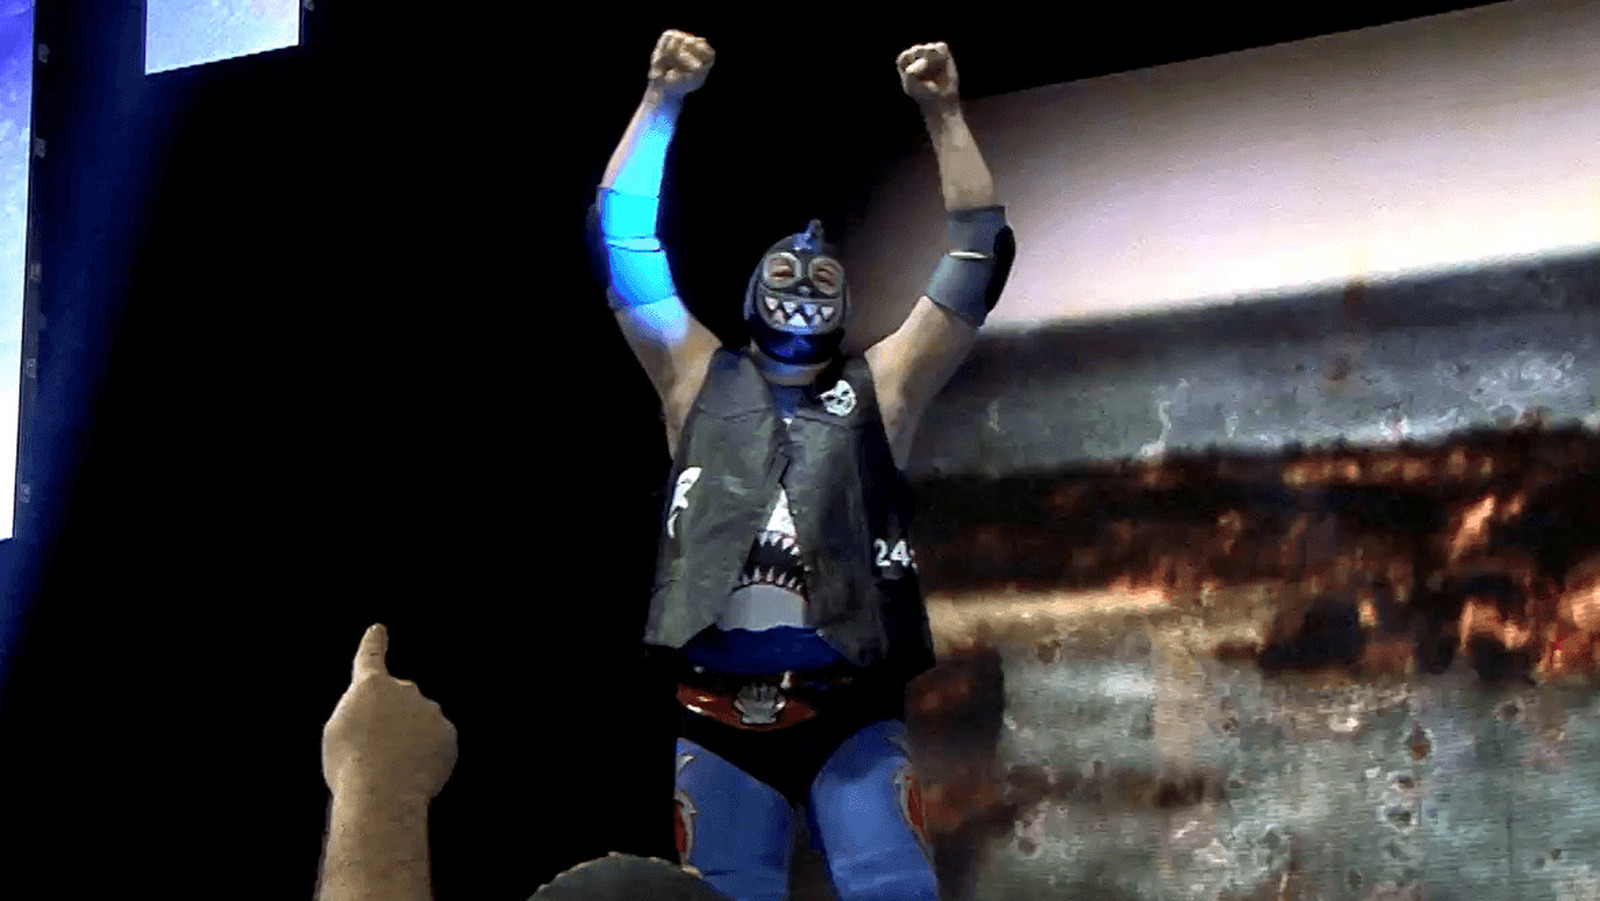 Former TNA Star Shark Boy Reportedly Backstage At AEW Dynamite For Shark Week Tie-In